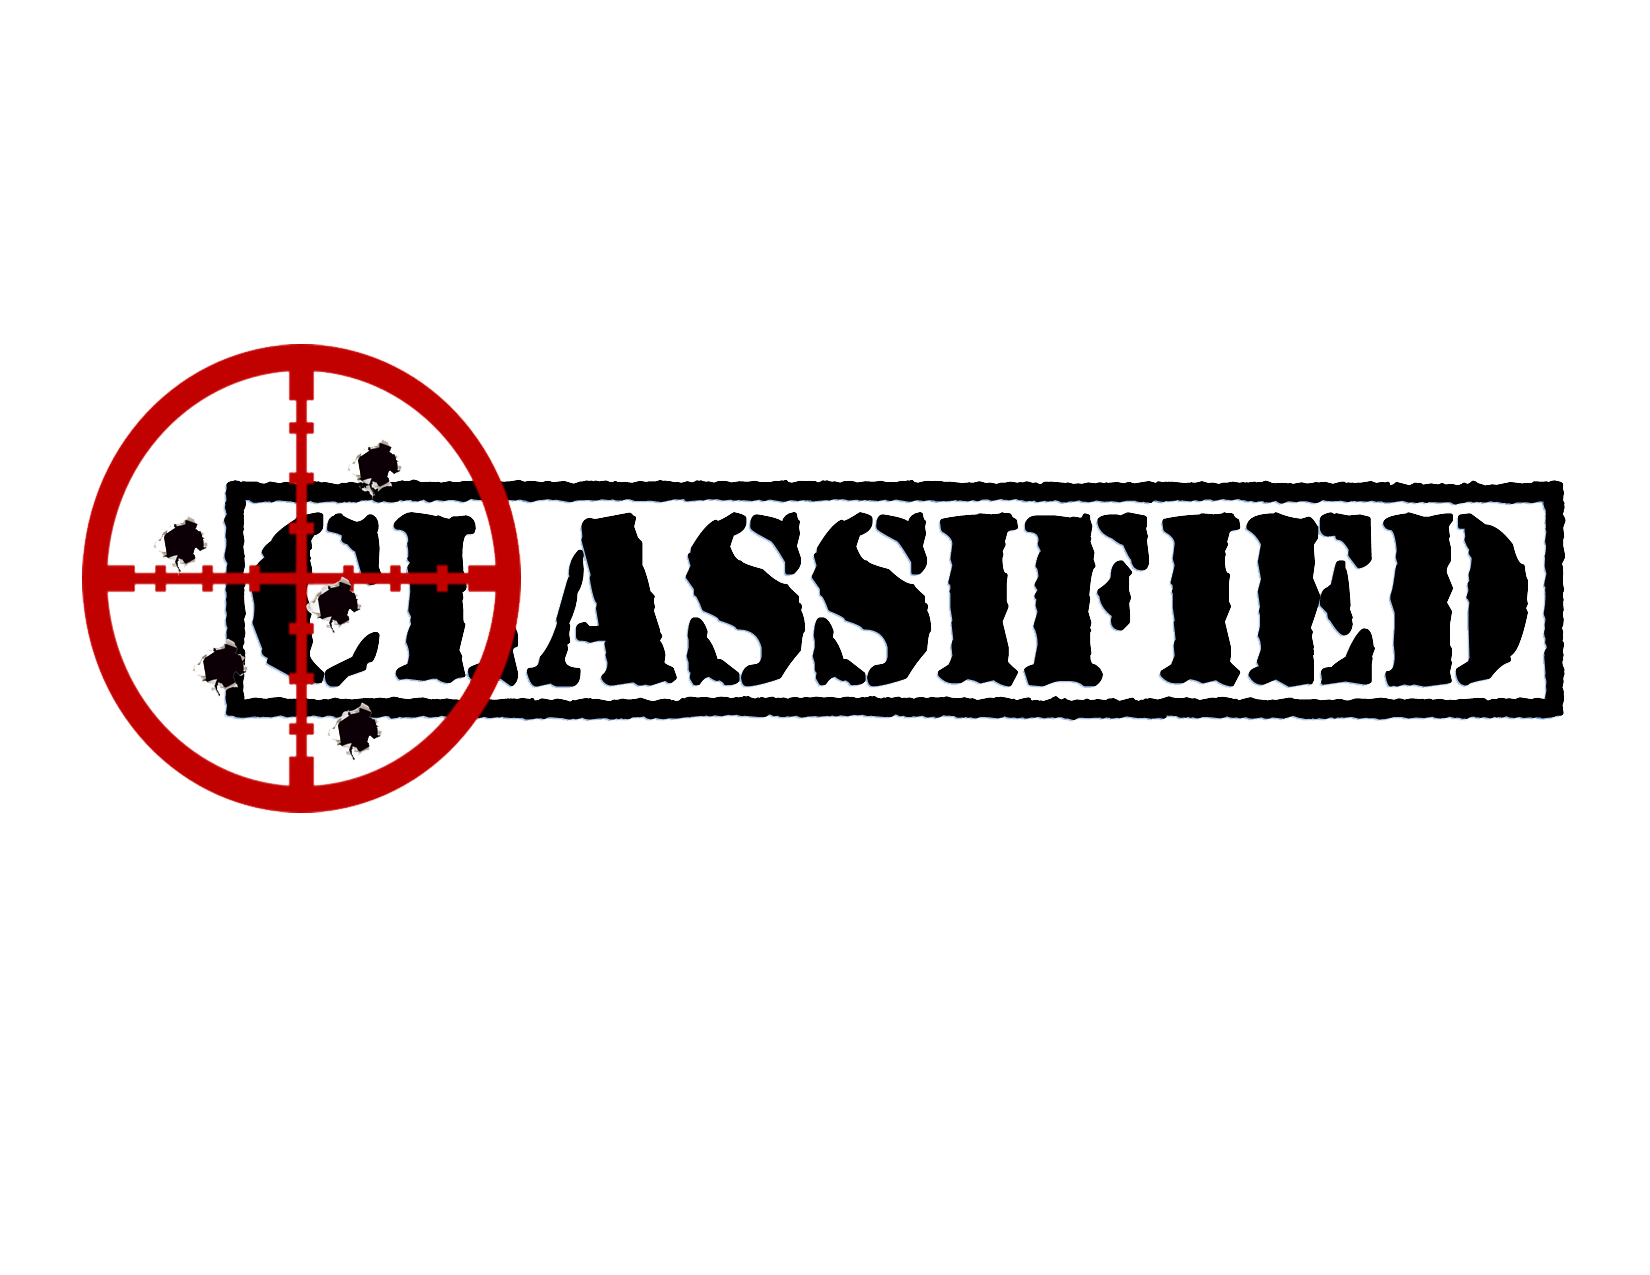 Classified Icon Background PNG Image